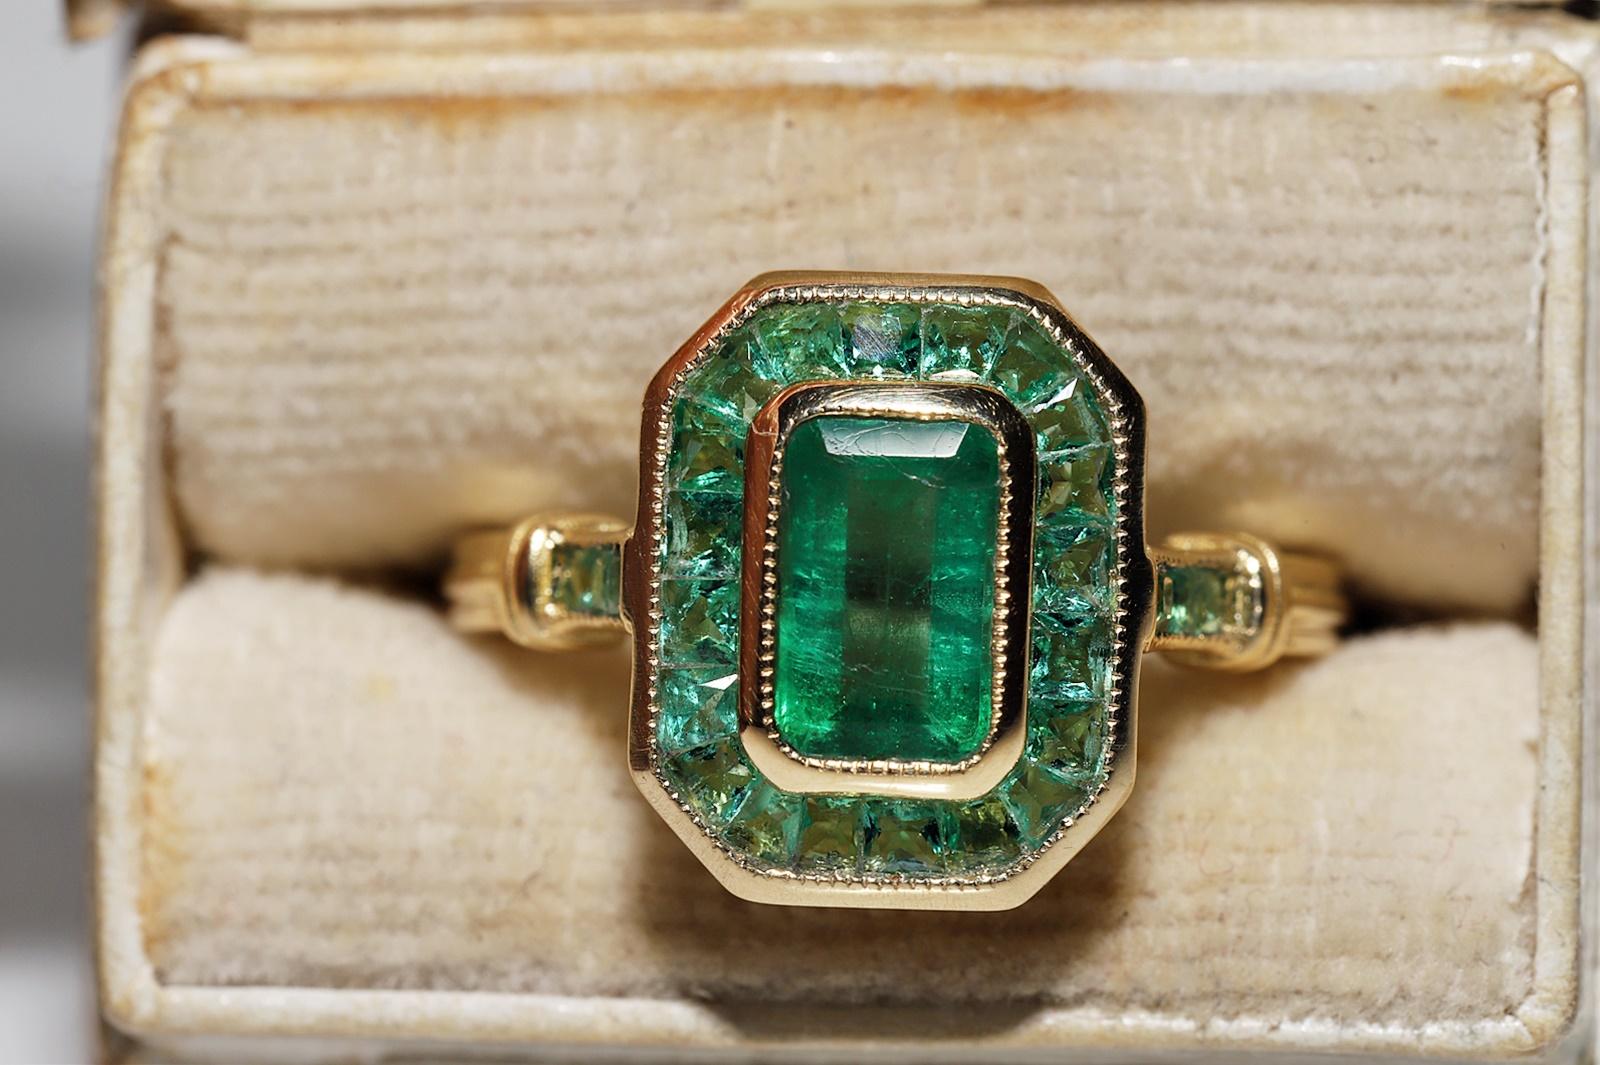 In very good condition.
Total weight is 5.7 grams.
Totally is main emerald 1.16 ct.
Totally is side caliber cut emerald 2.16 ct.
Ring size is US 6.5 
We can make any size.
Box is not included.
Please contact for any questions.